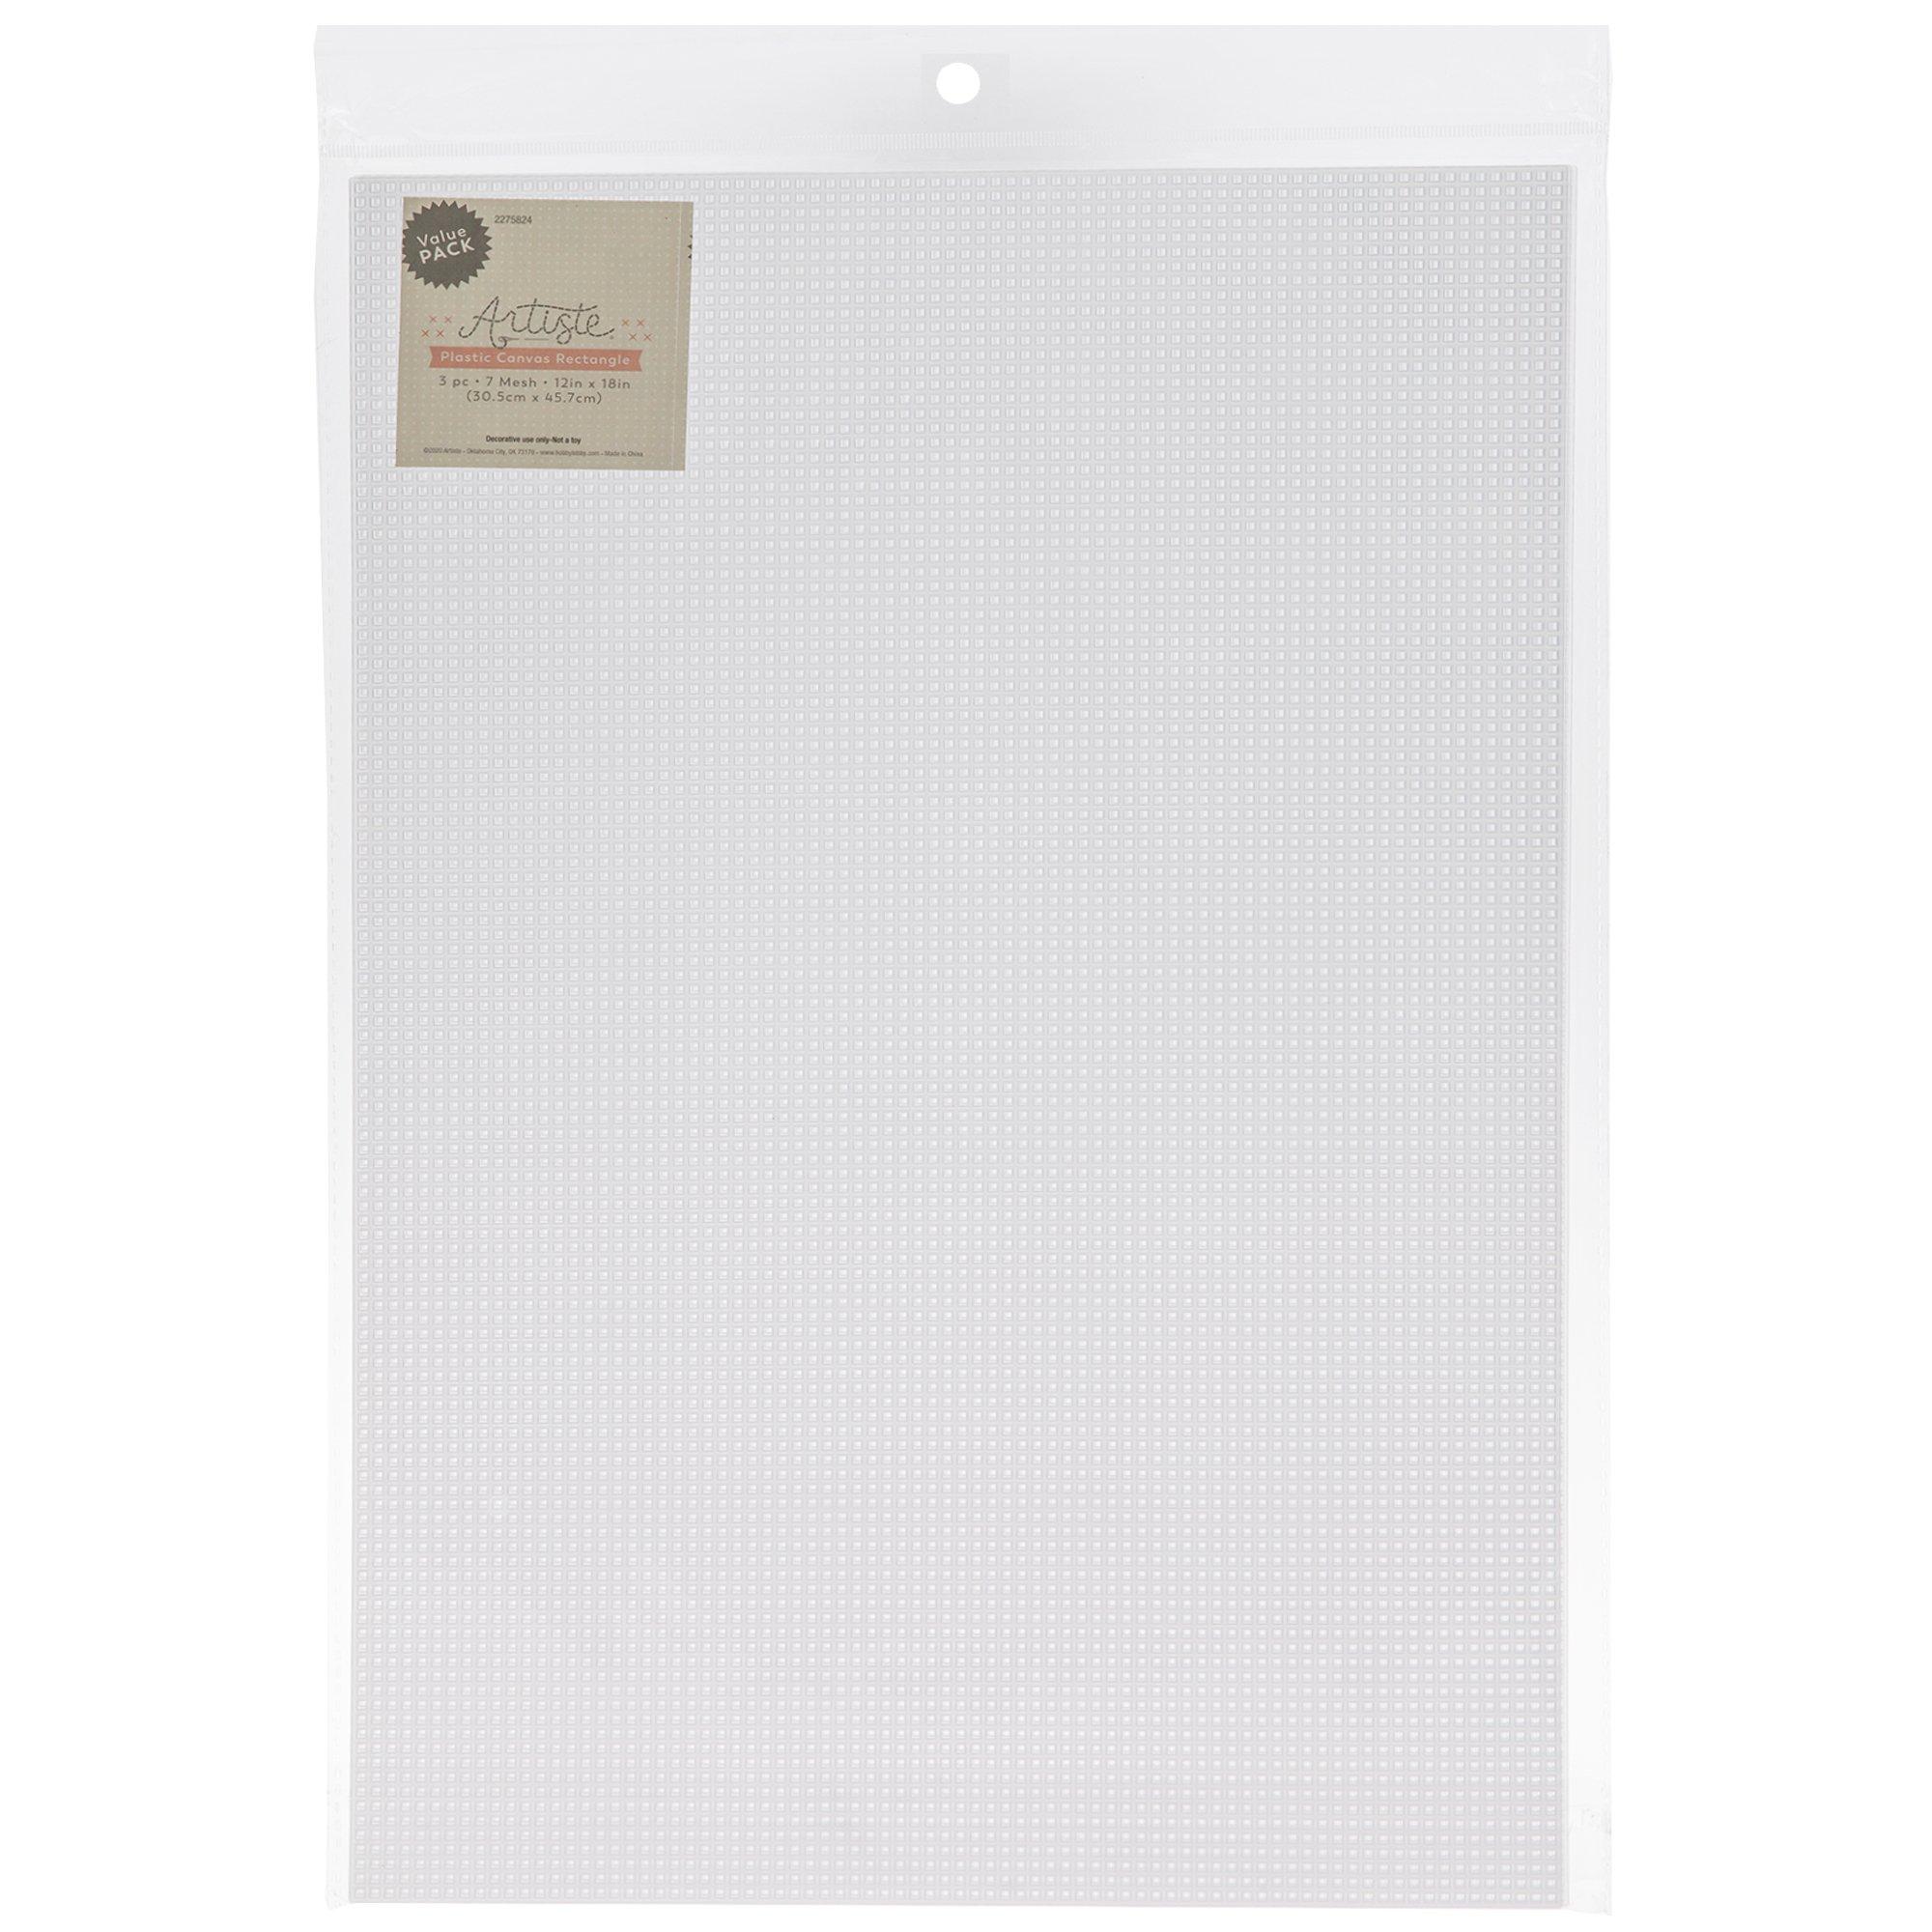 Darice 10 Mesh Clear Plastic Canvas Sheets, White